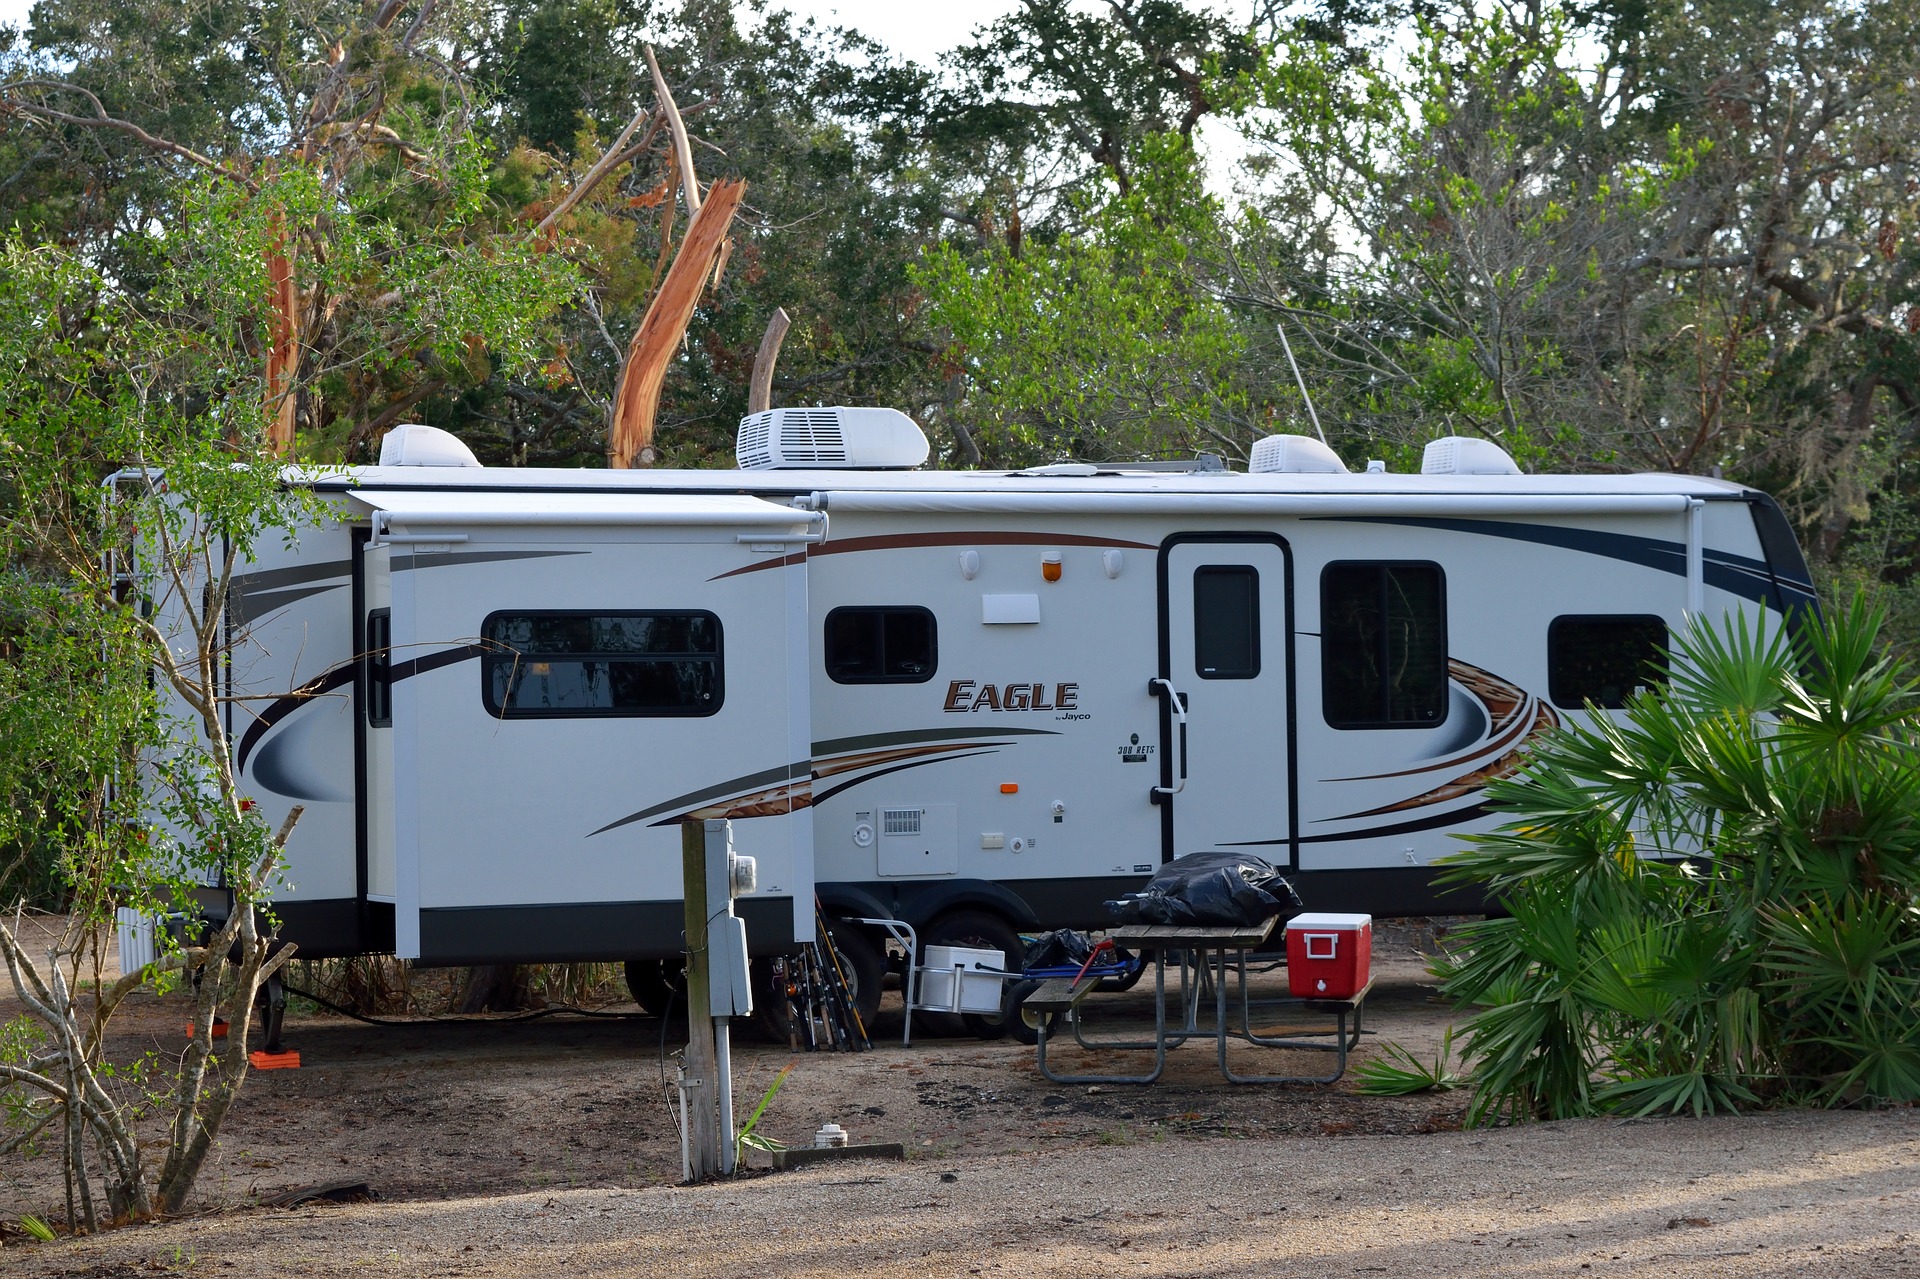 RV travel and camping